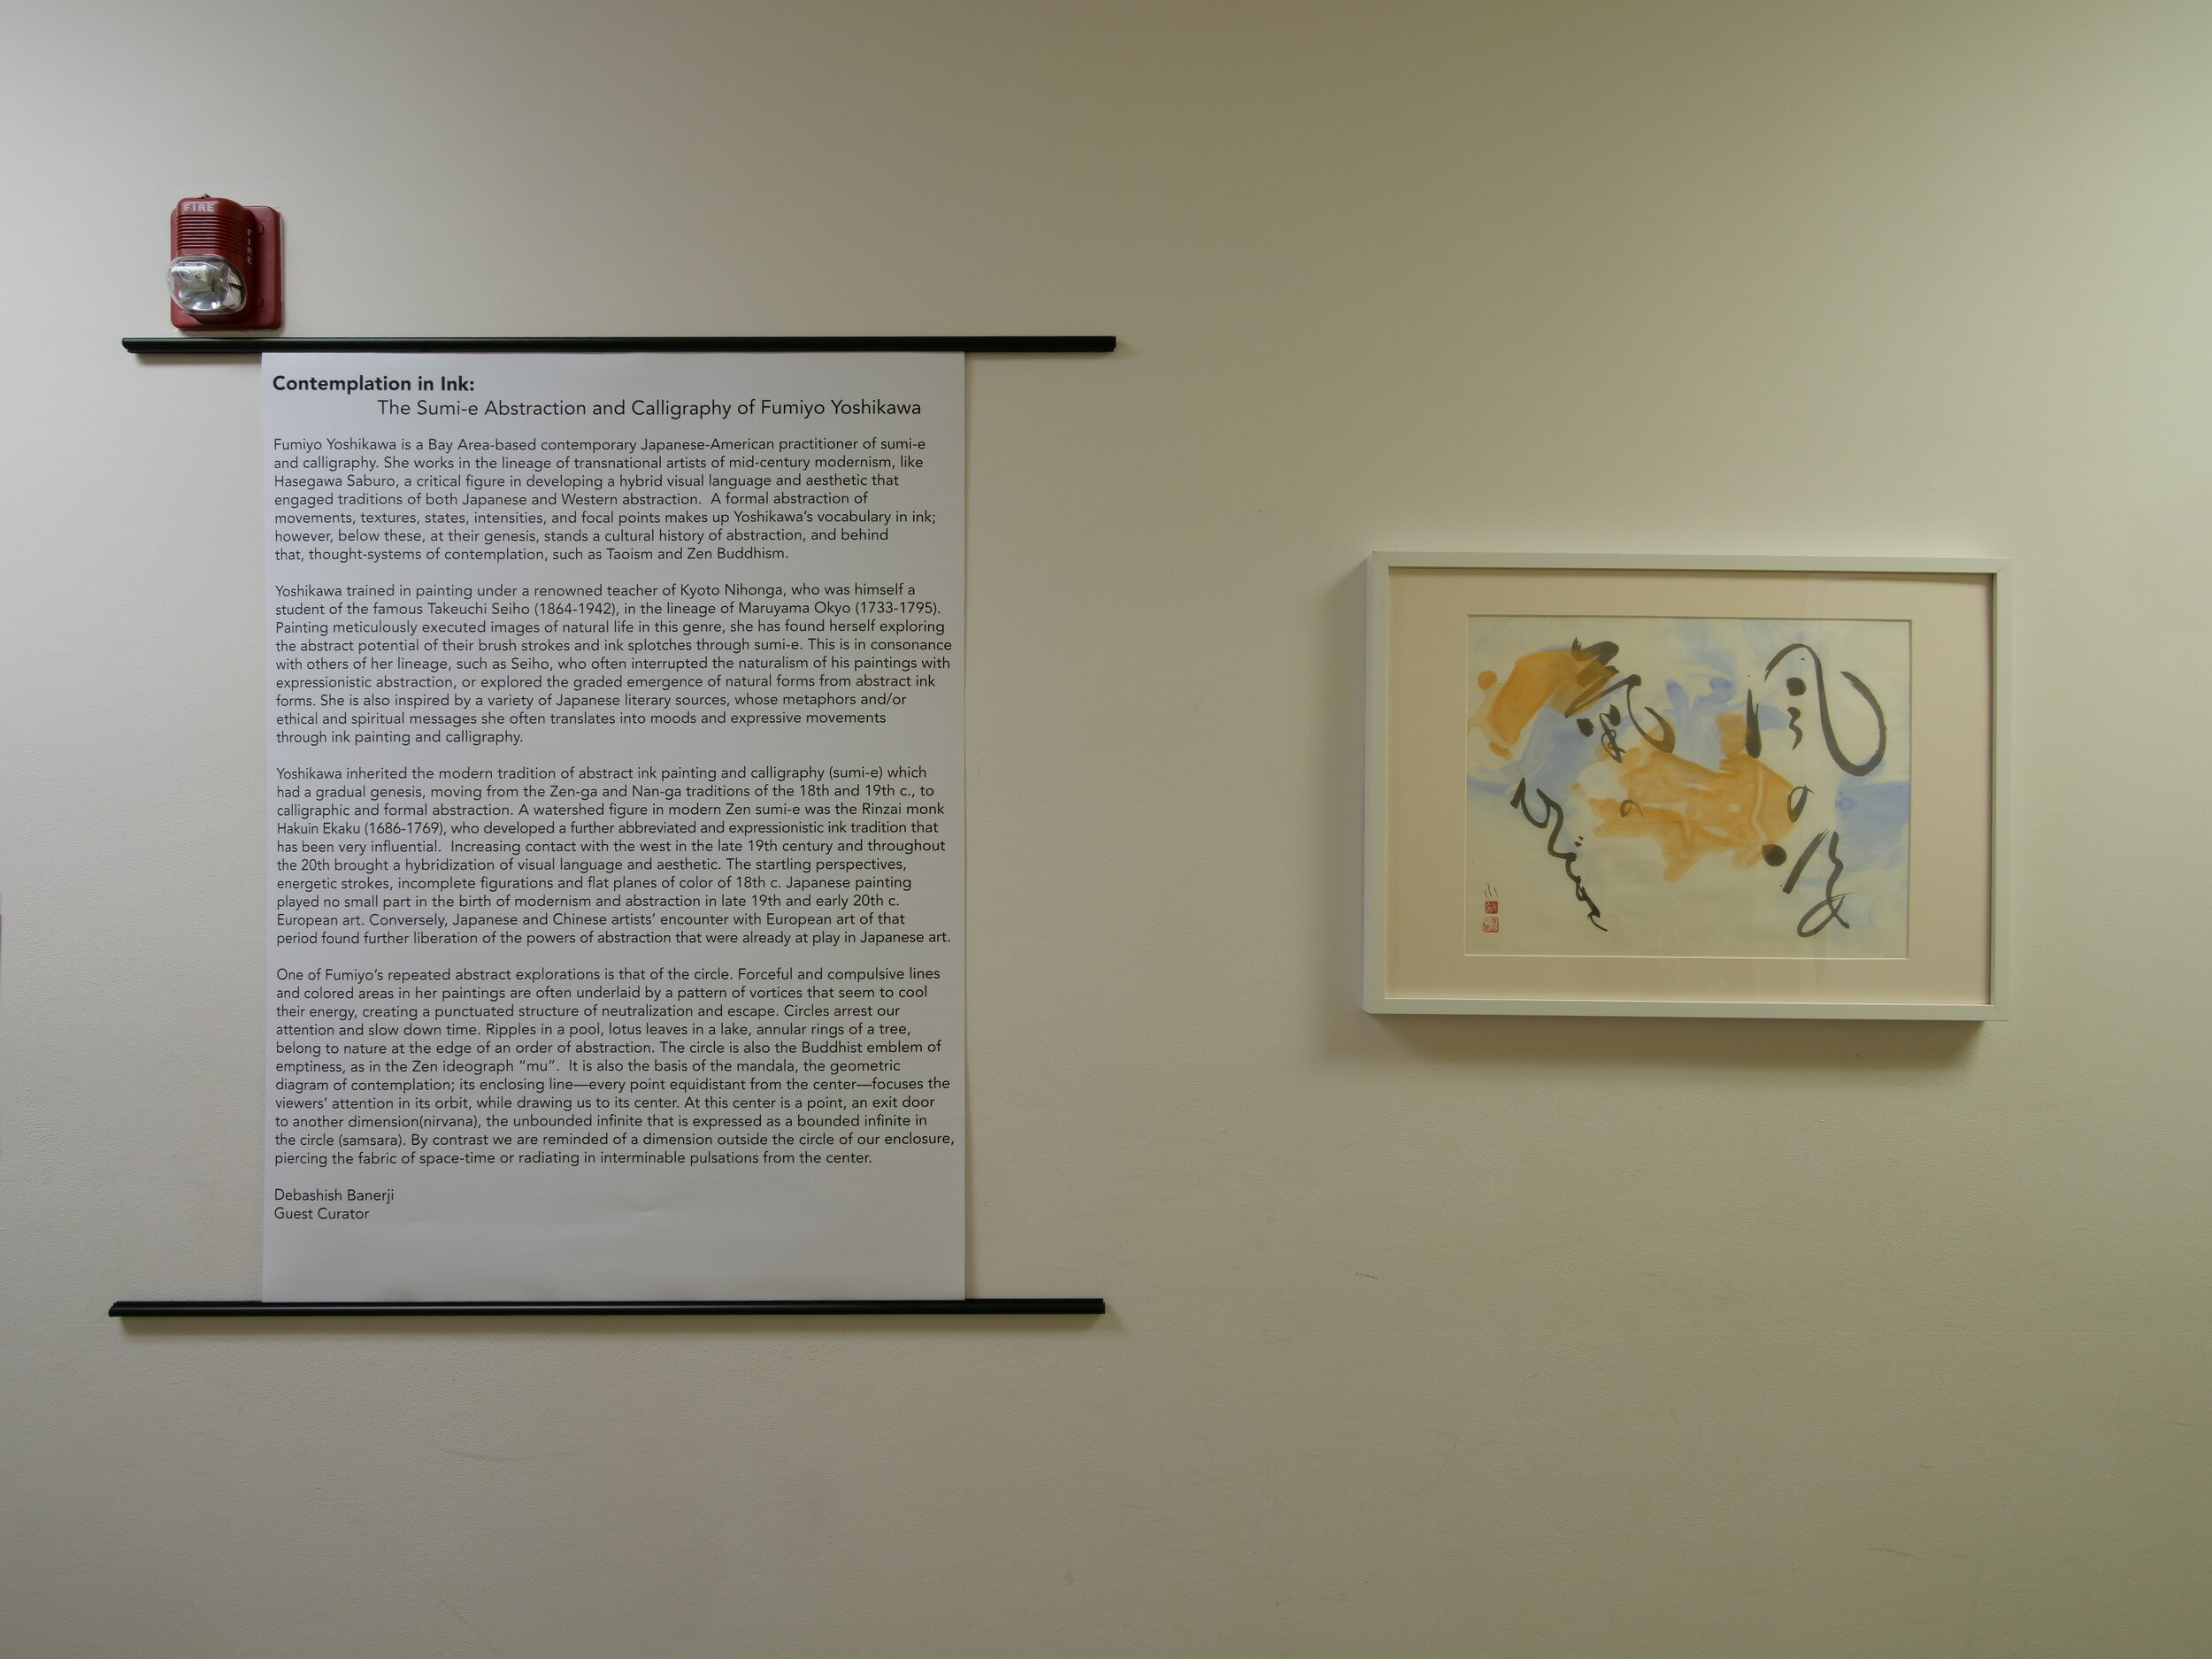 A panel describing the artist's work next to a colorful ink drawing.